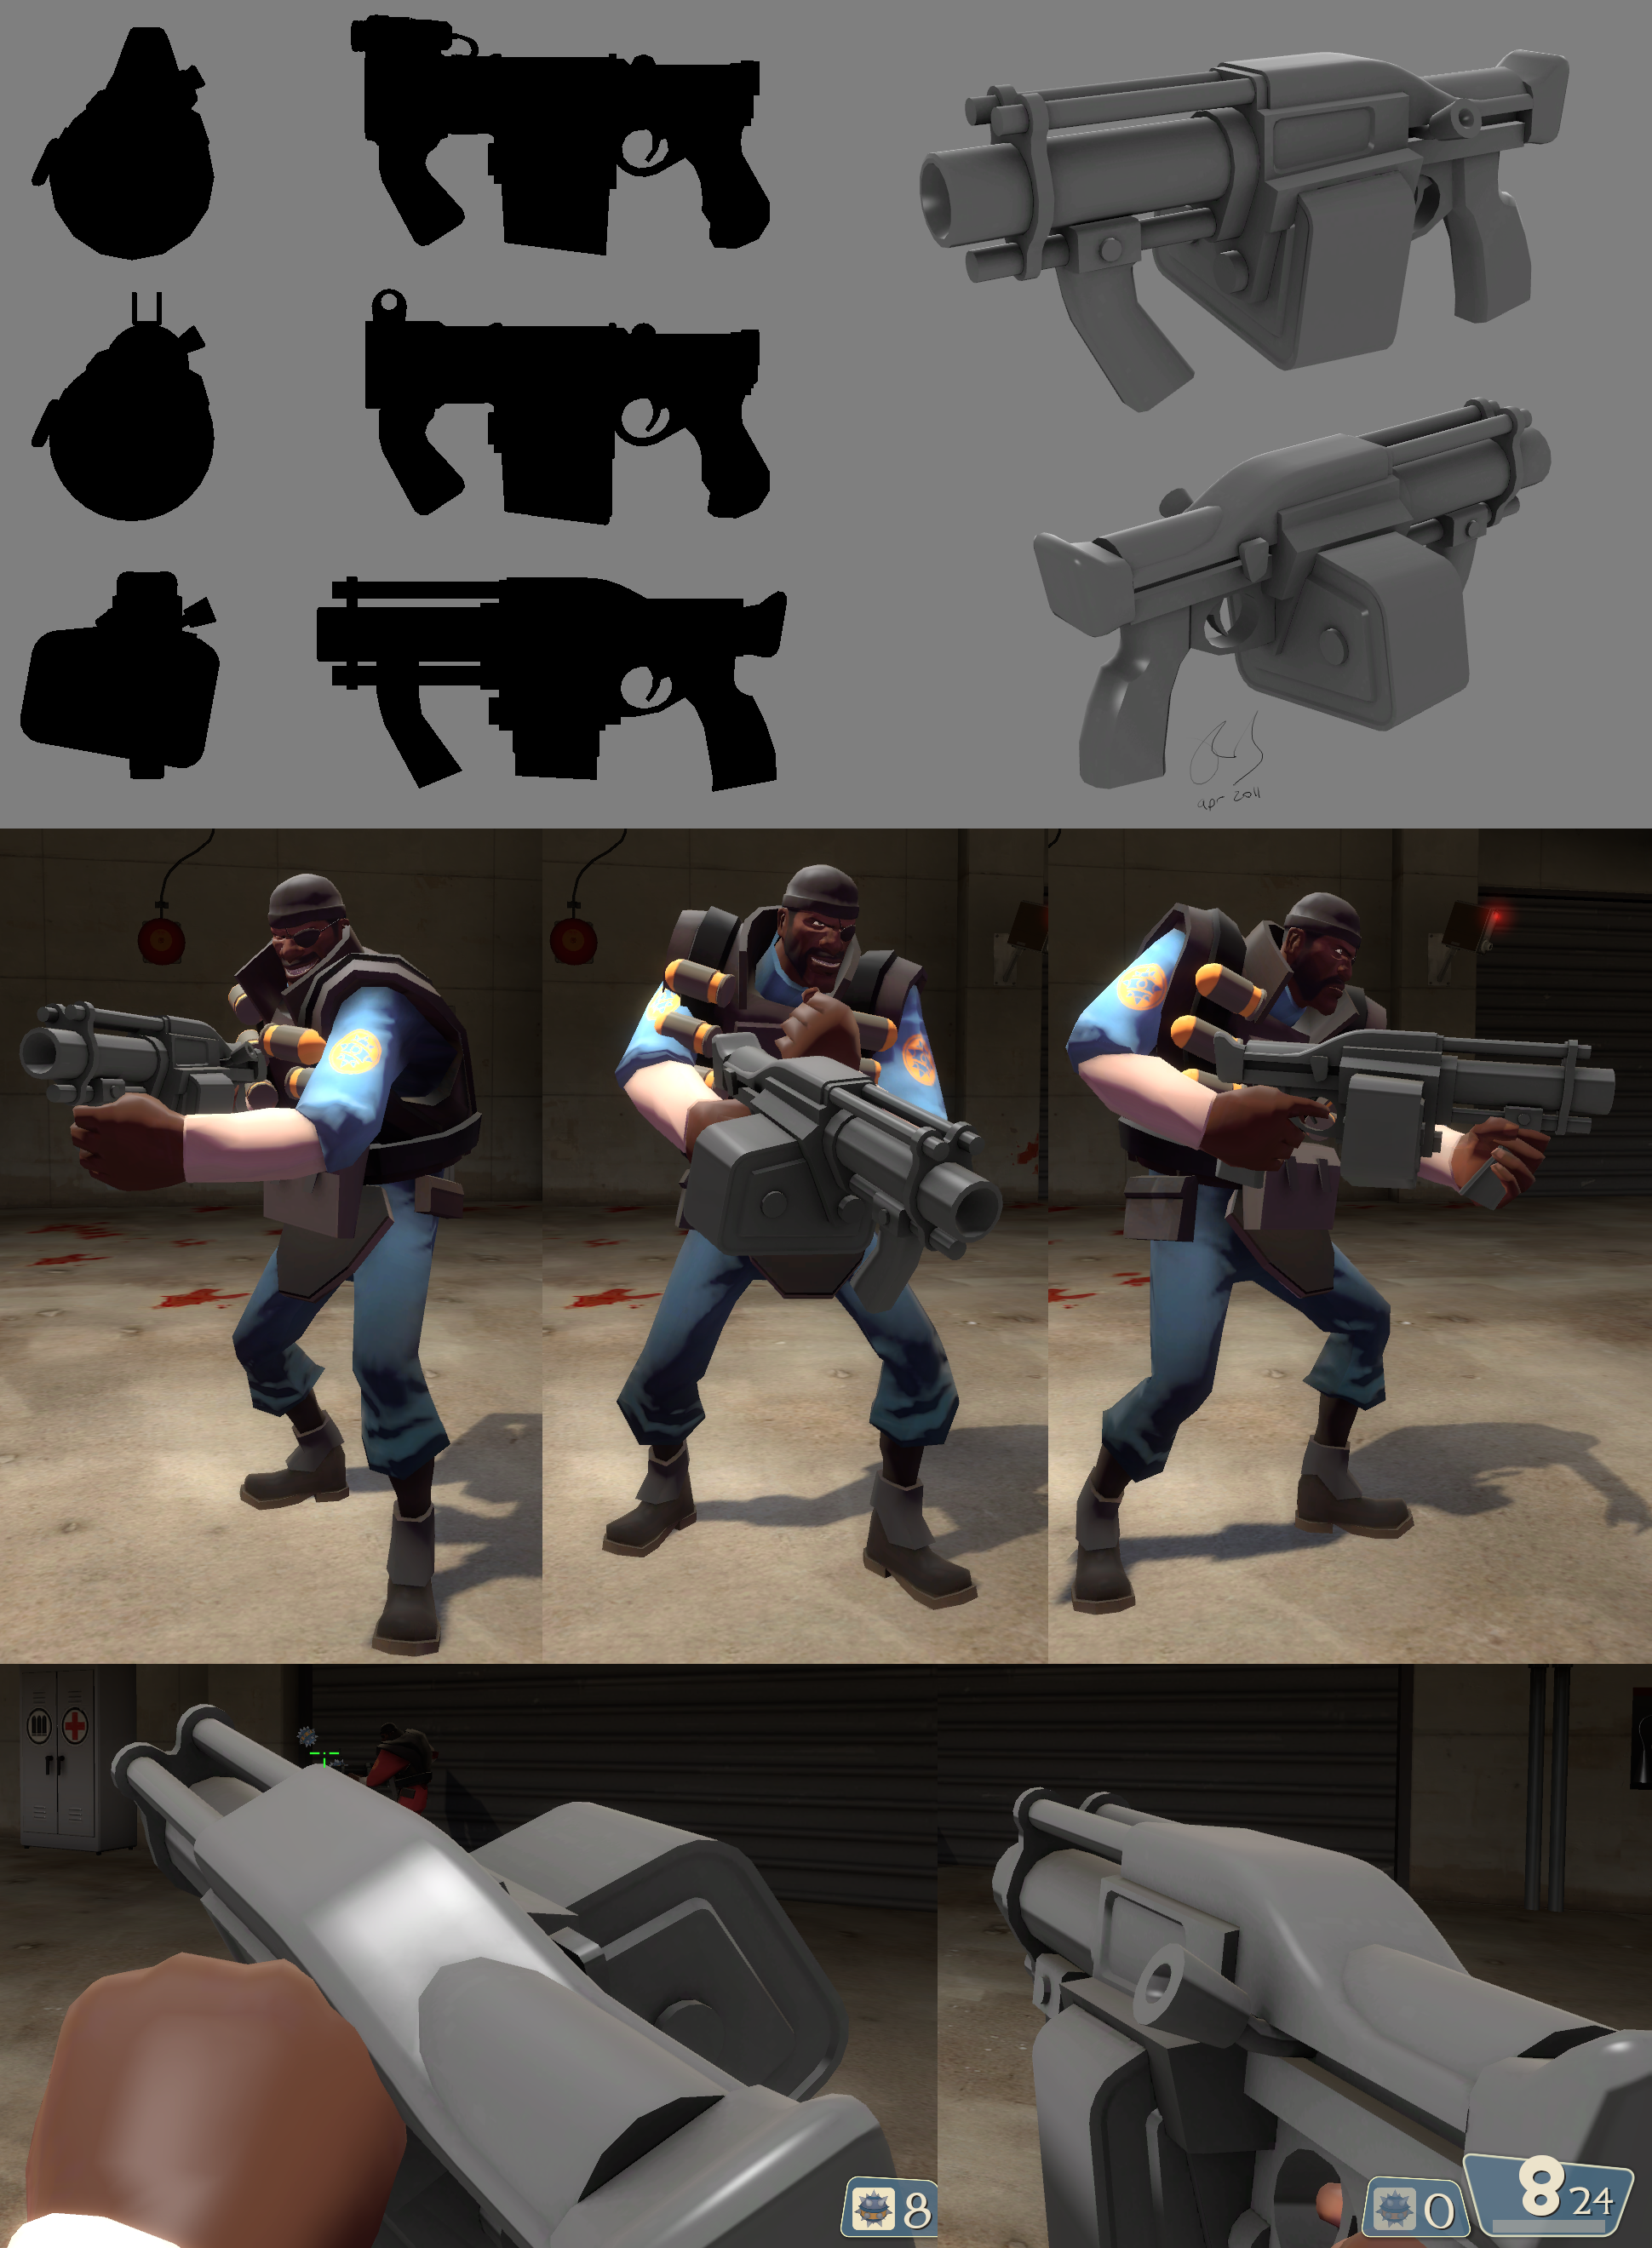 tf2_sticky_launcher_wip_by_elbagast-d3dv3at.png